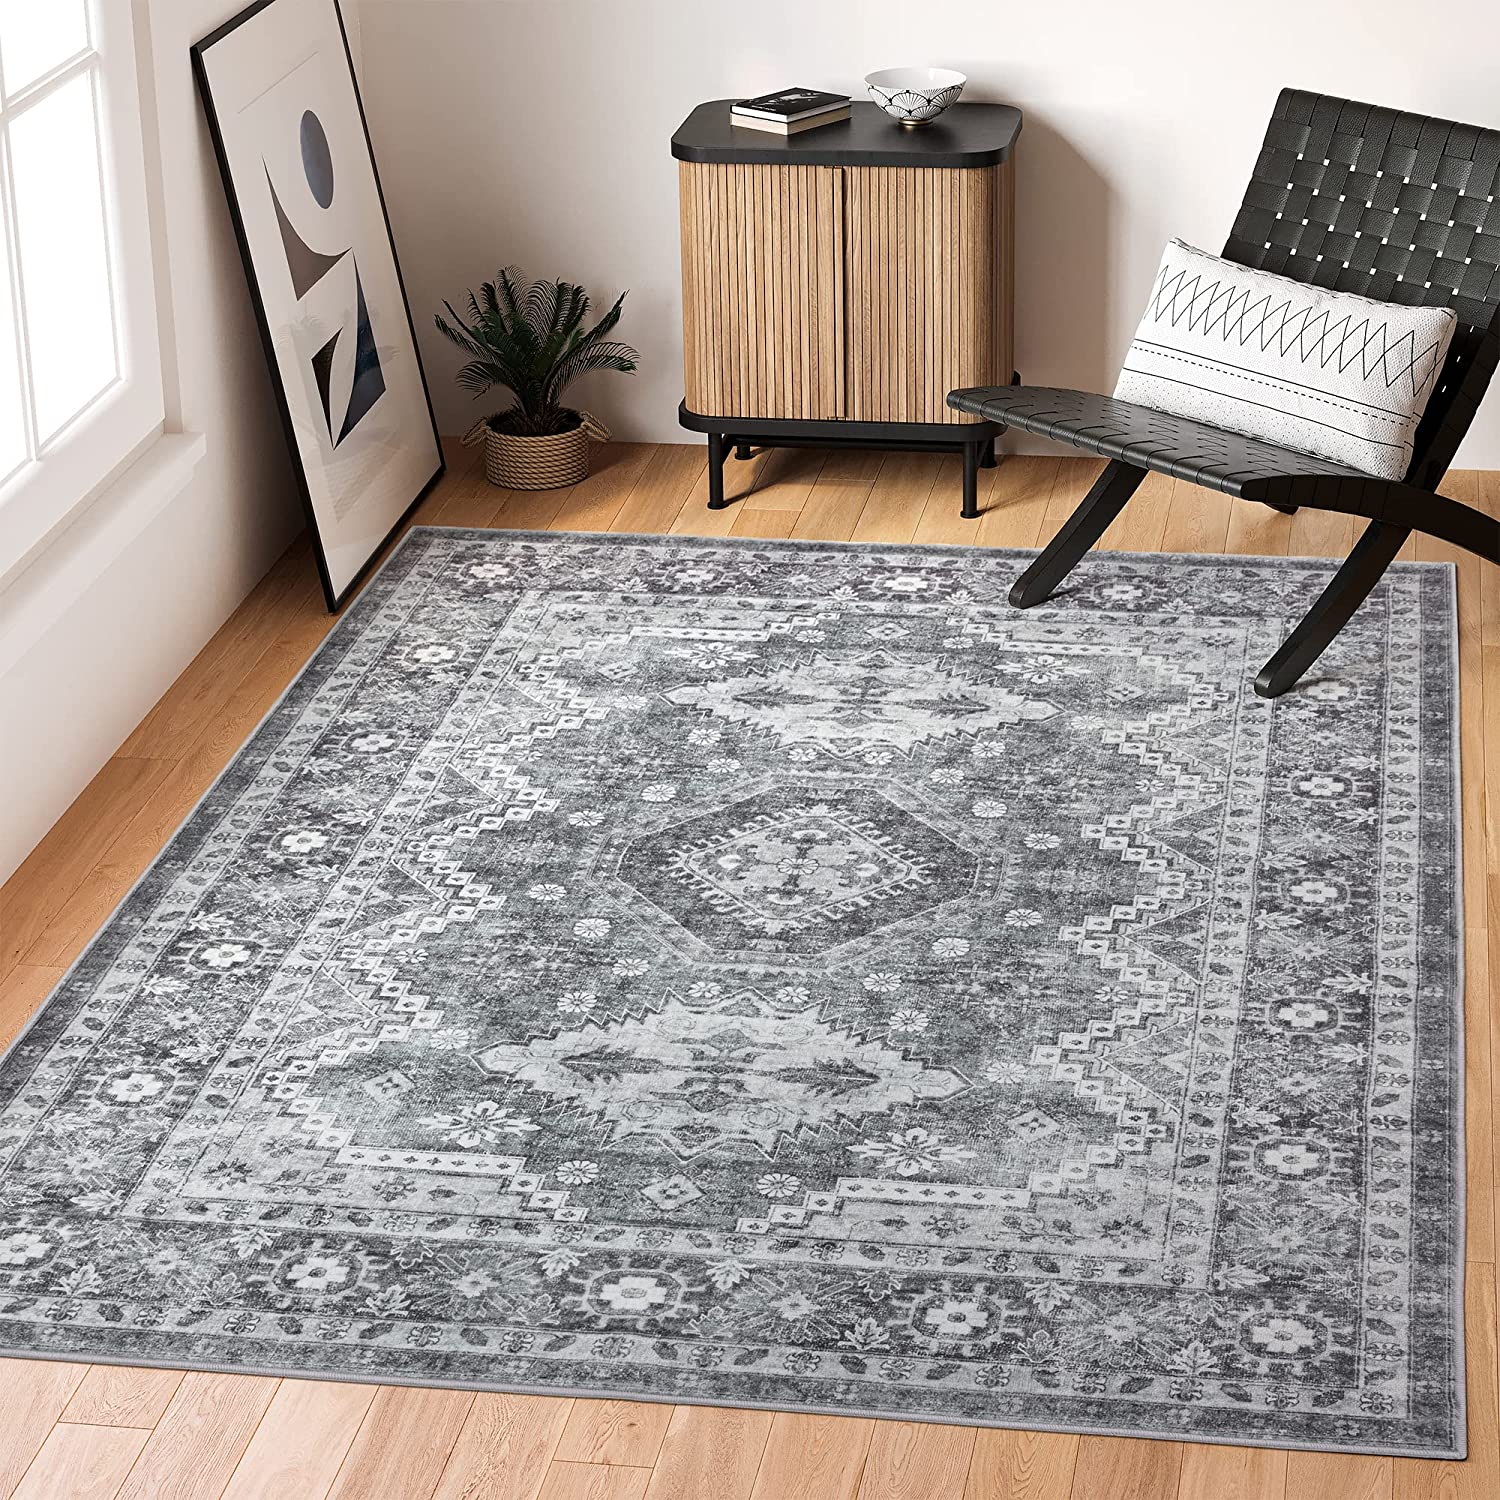 Rugland 5x7 Area Rugs - Stain Resistant, Washable and [...]